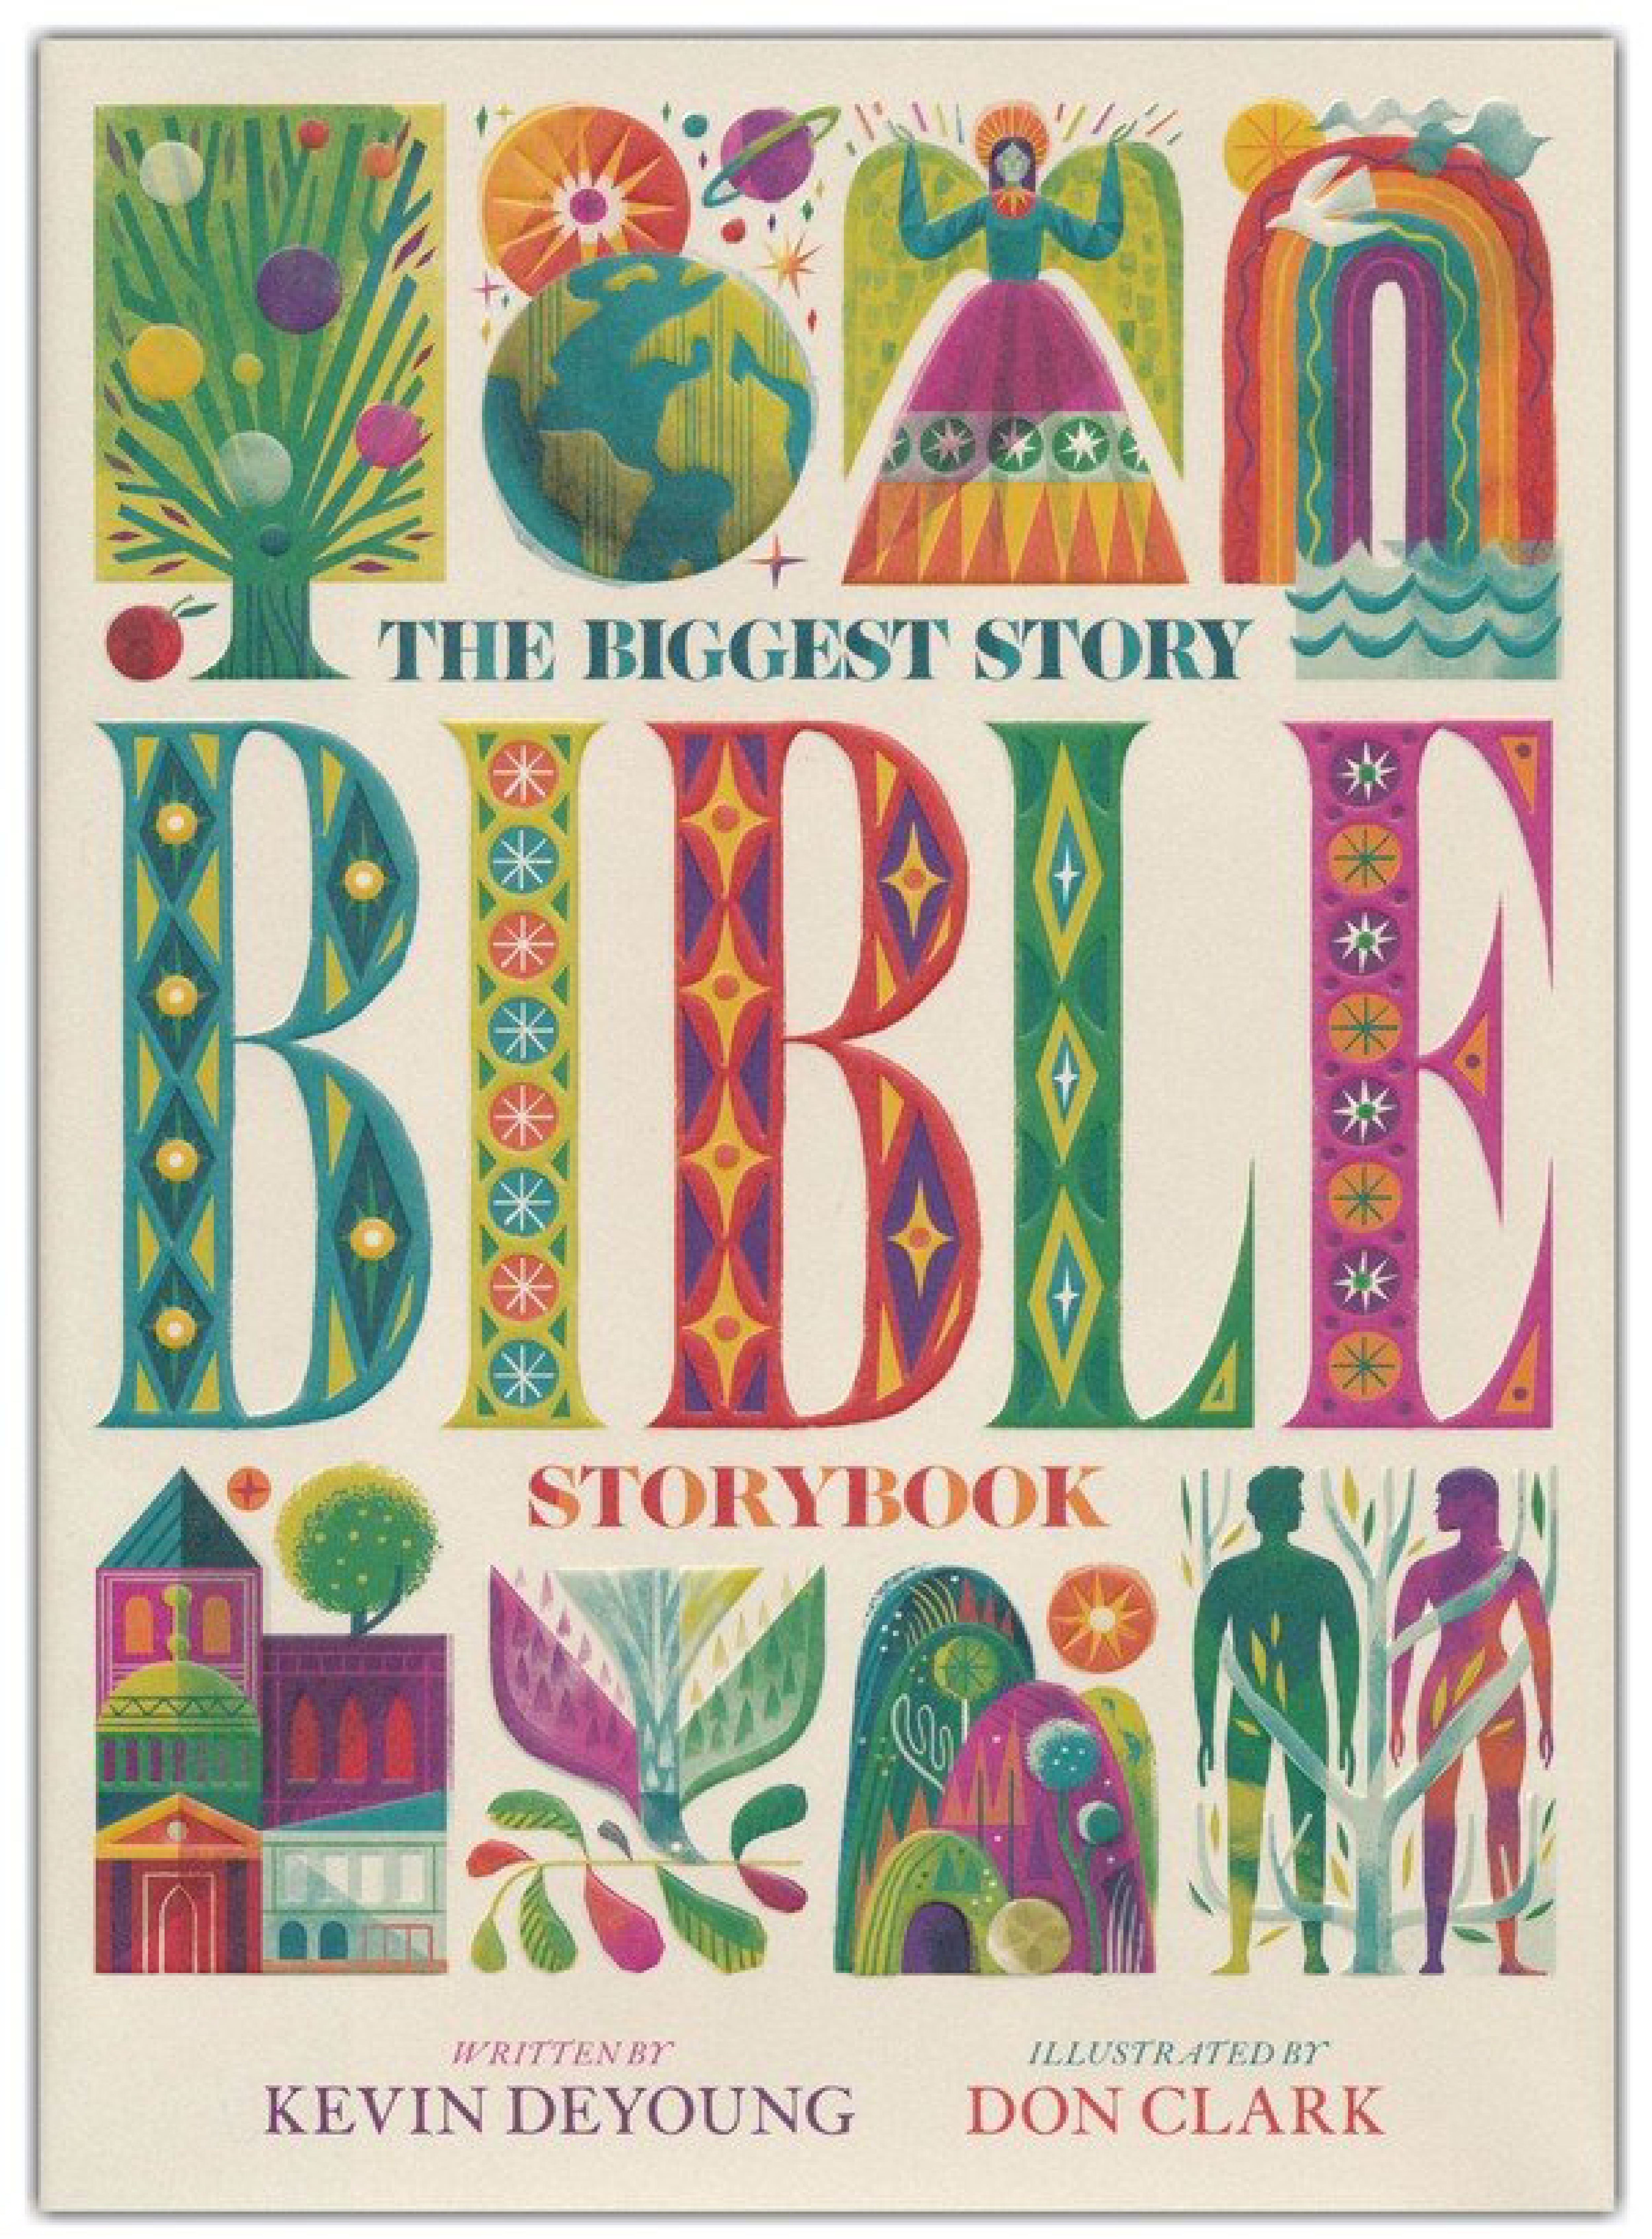 The Biggest Story Bible Storybook Book Cover